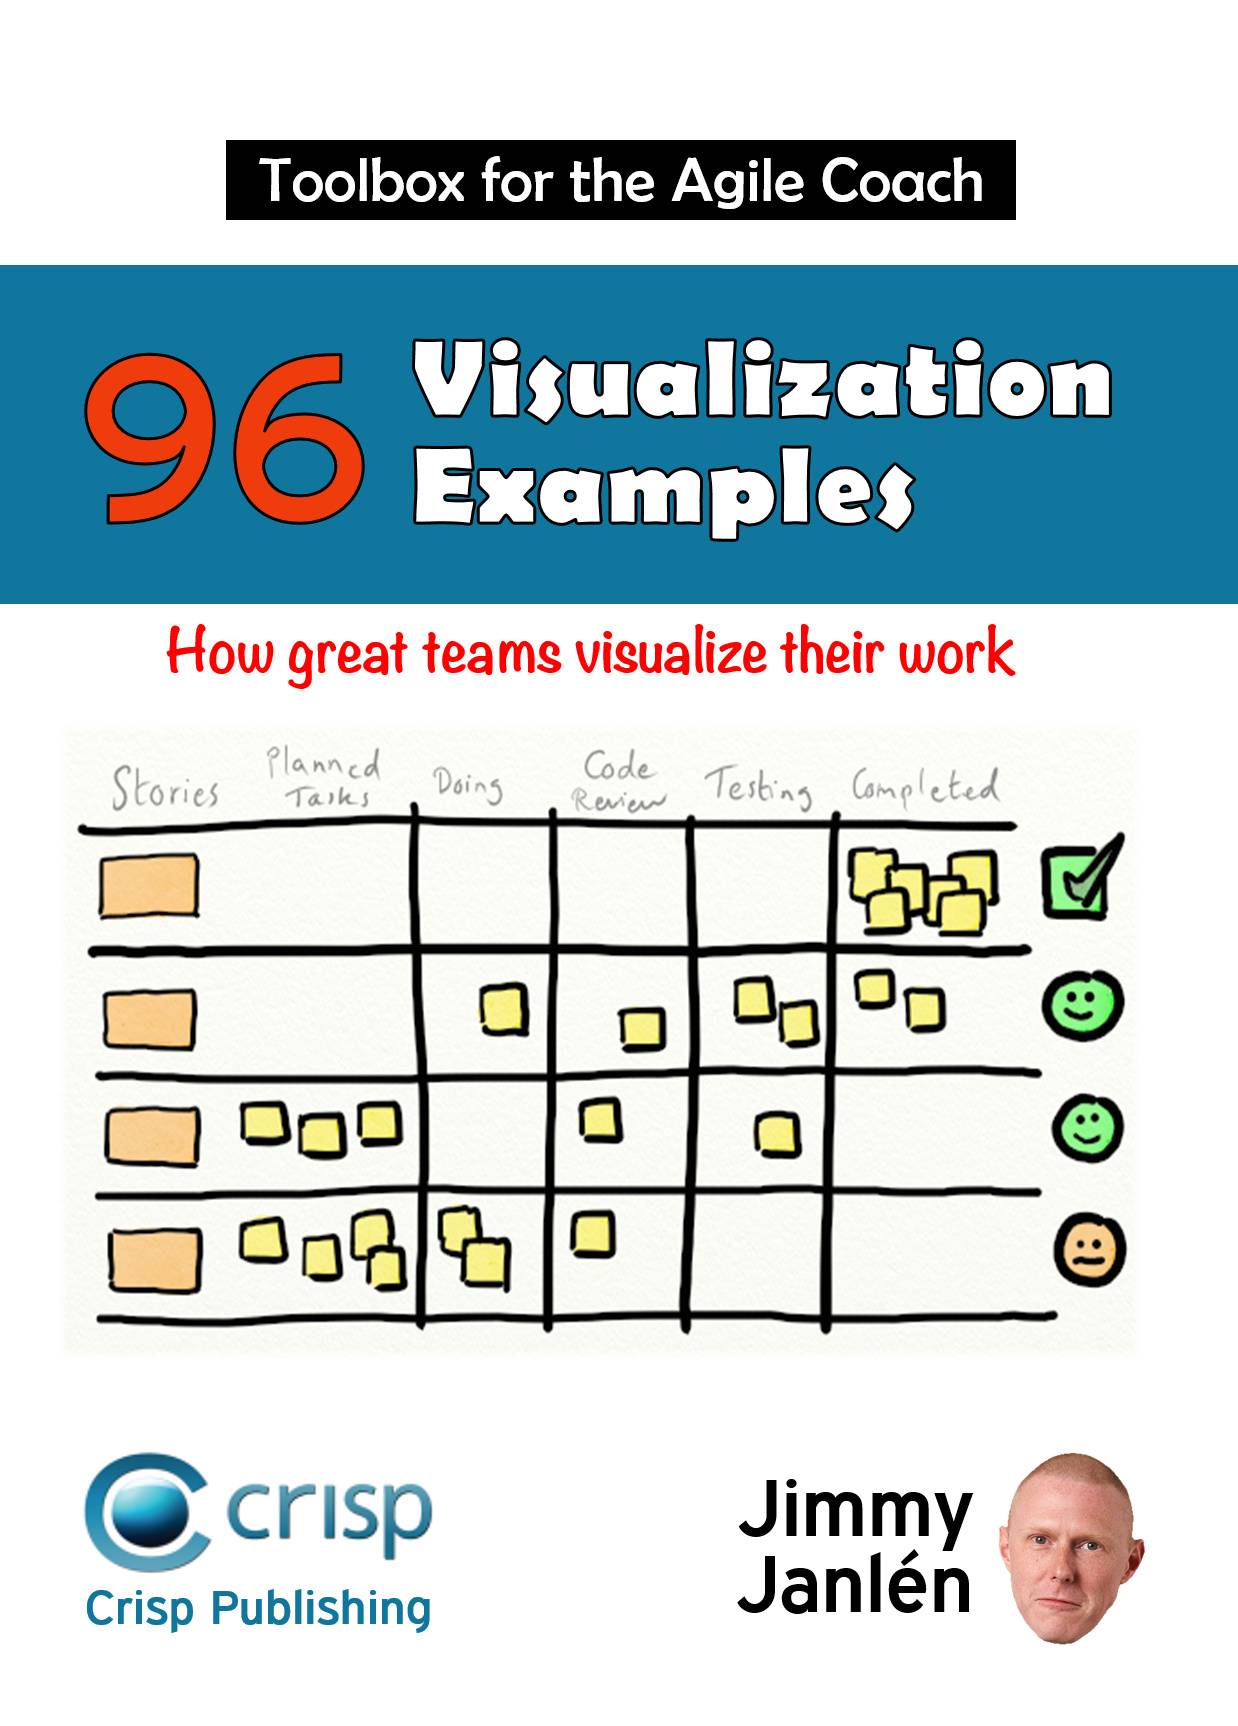 Toolbox for the agile coach : 96 visualization examples - how great teams visualize their work